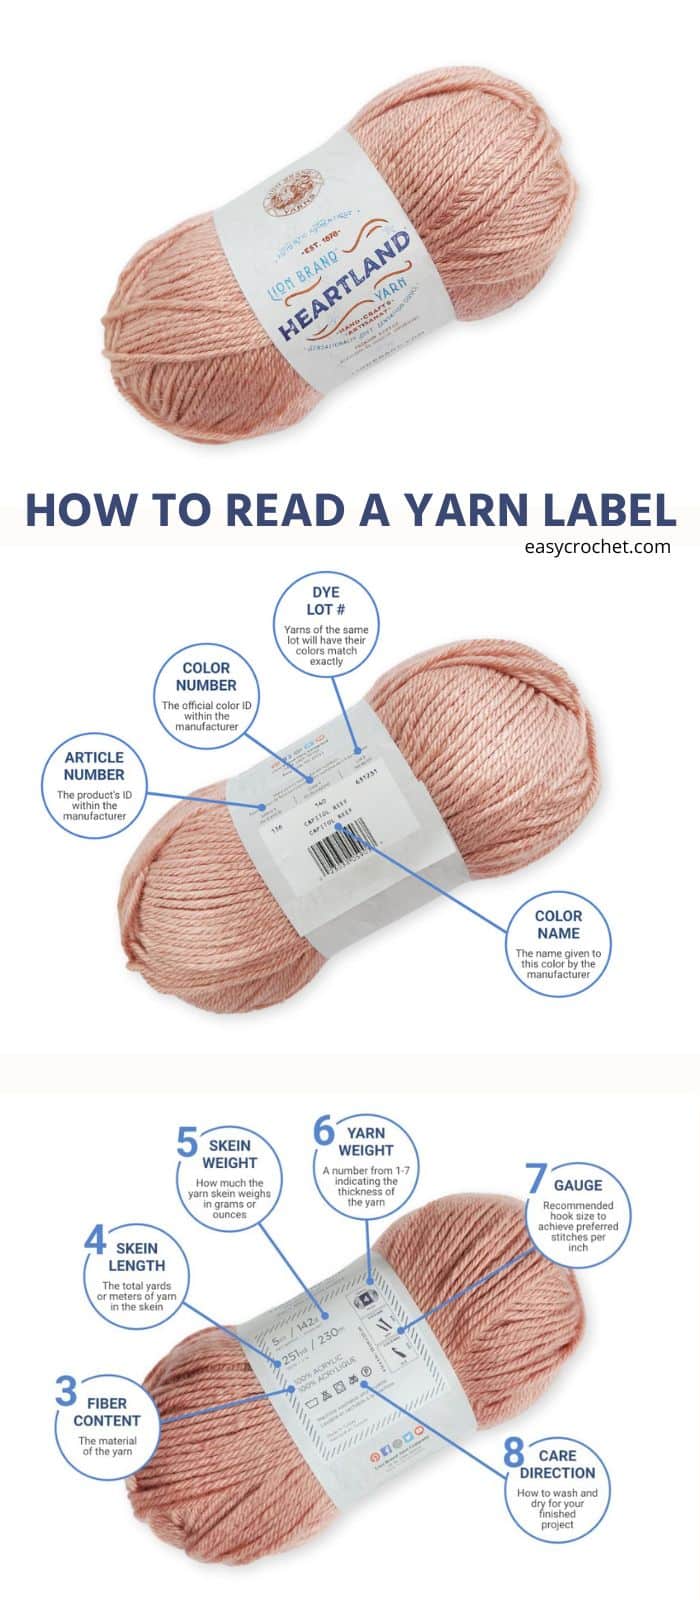 Learn all about Yarn Labels with this guide from easycrochet.com via @easycrochetcom